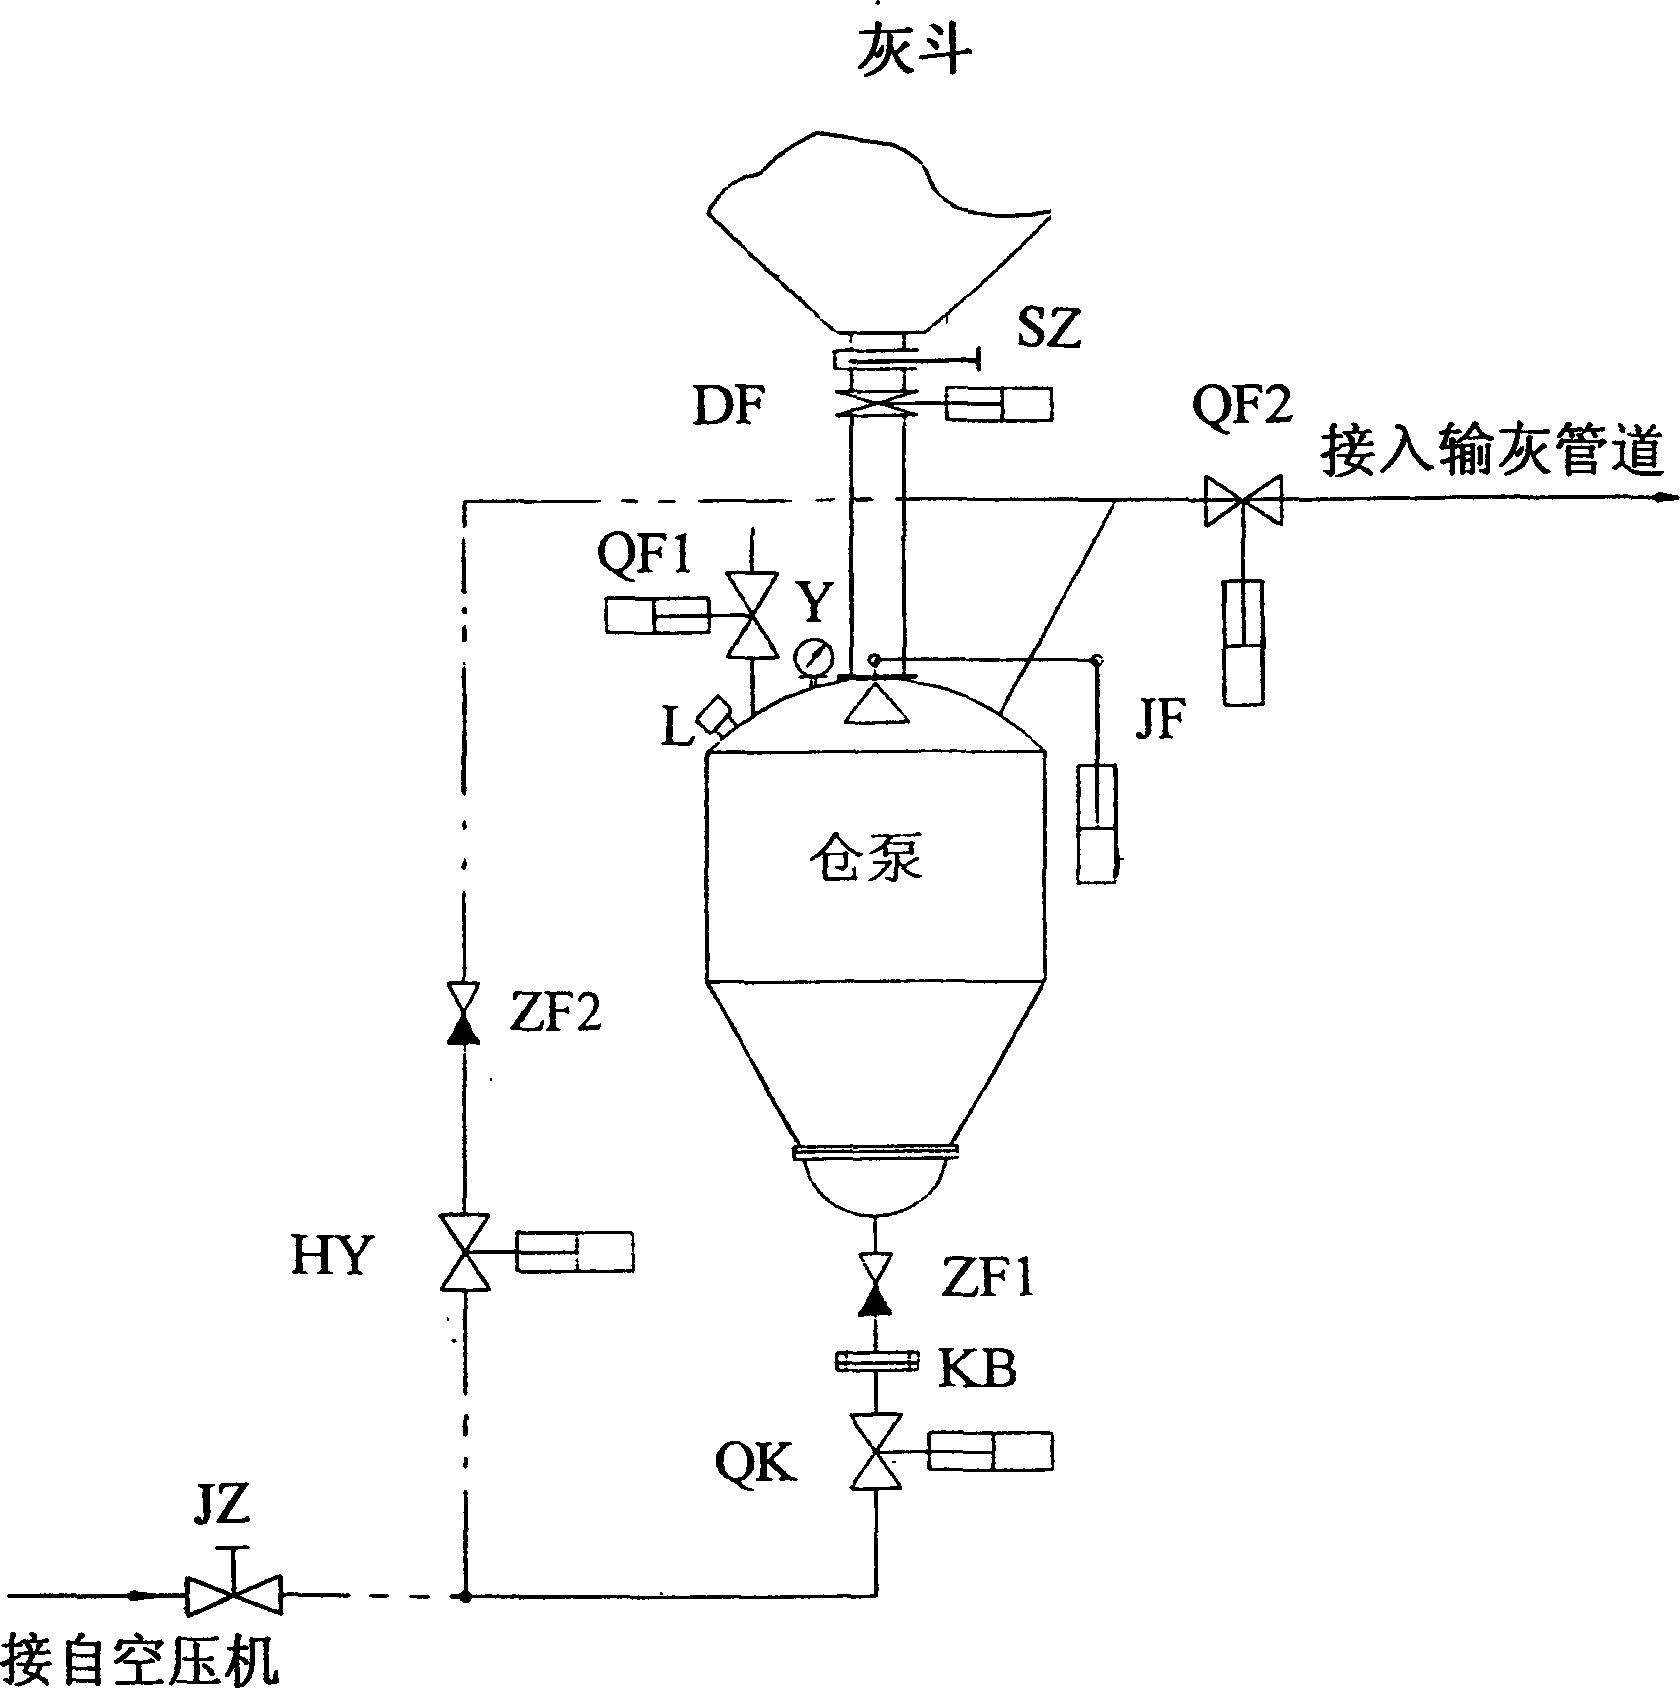 Positive pressure concentrated phase constant pressure conveying system